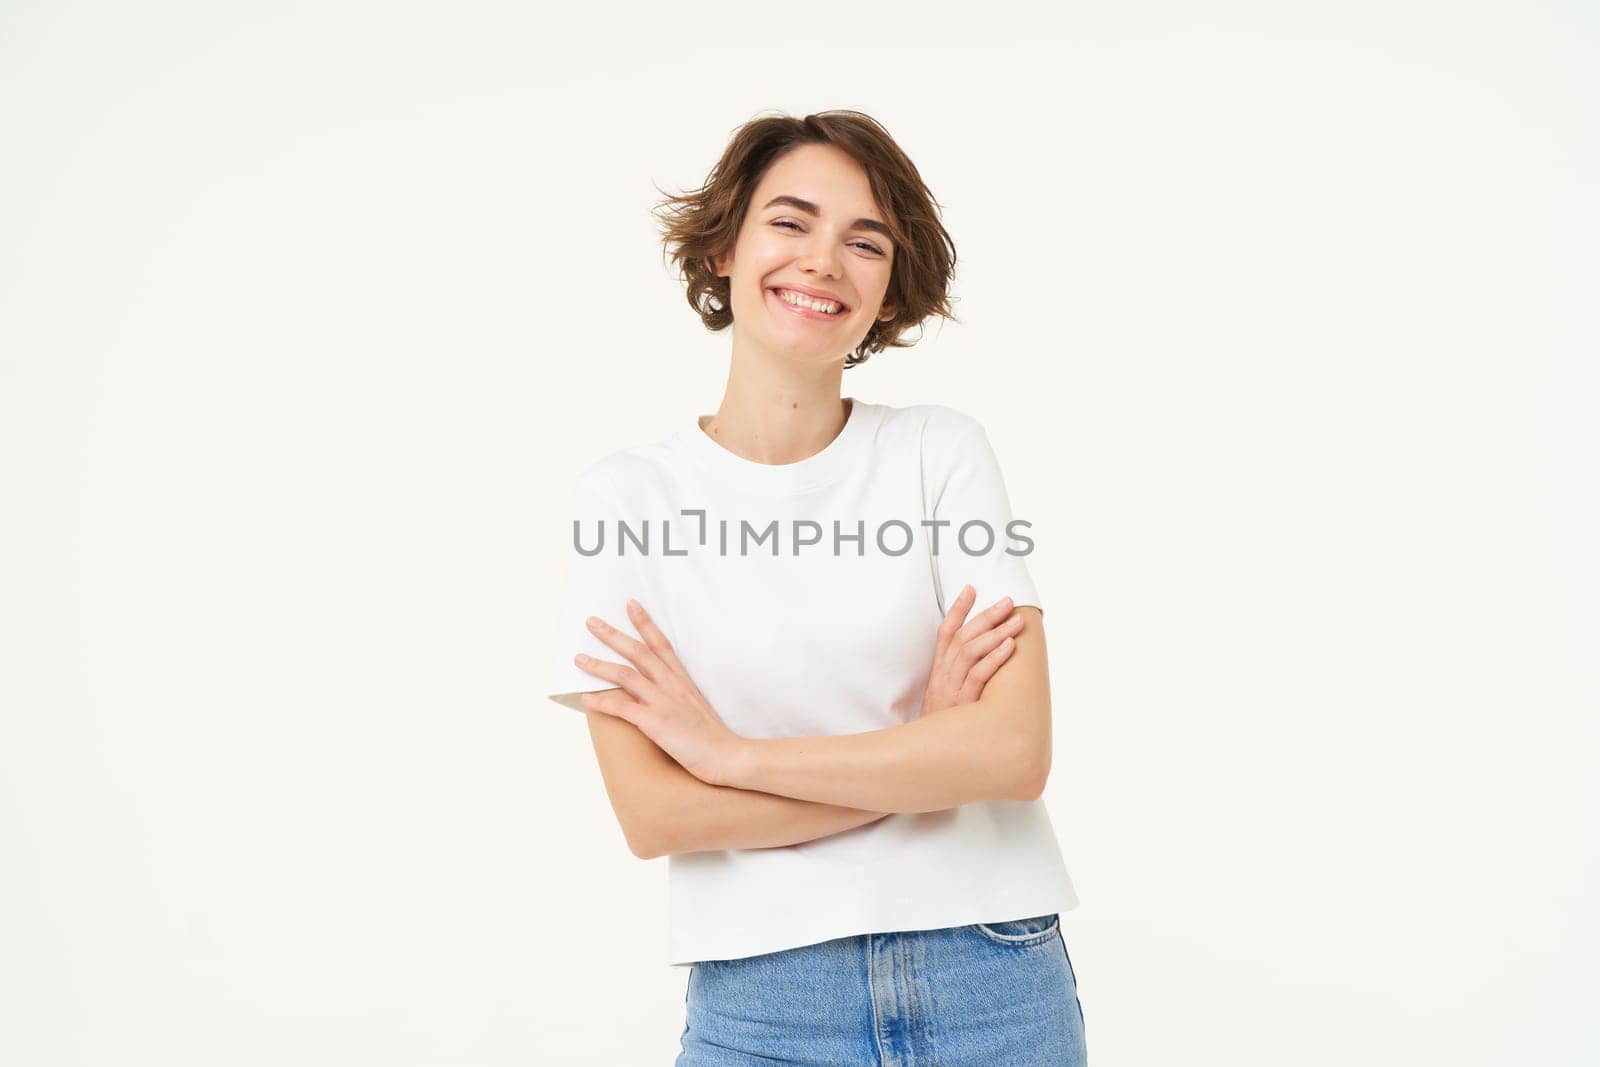 Portrait of cheerful woman laughing and smiling, cross arms on chest, standing in confident power pose, young professional concept, white studio background.